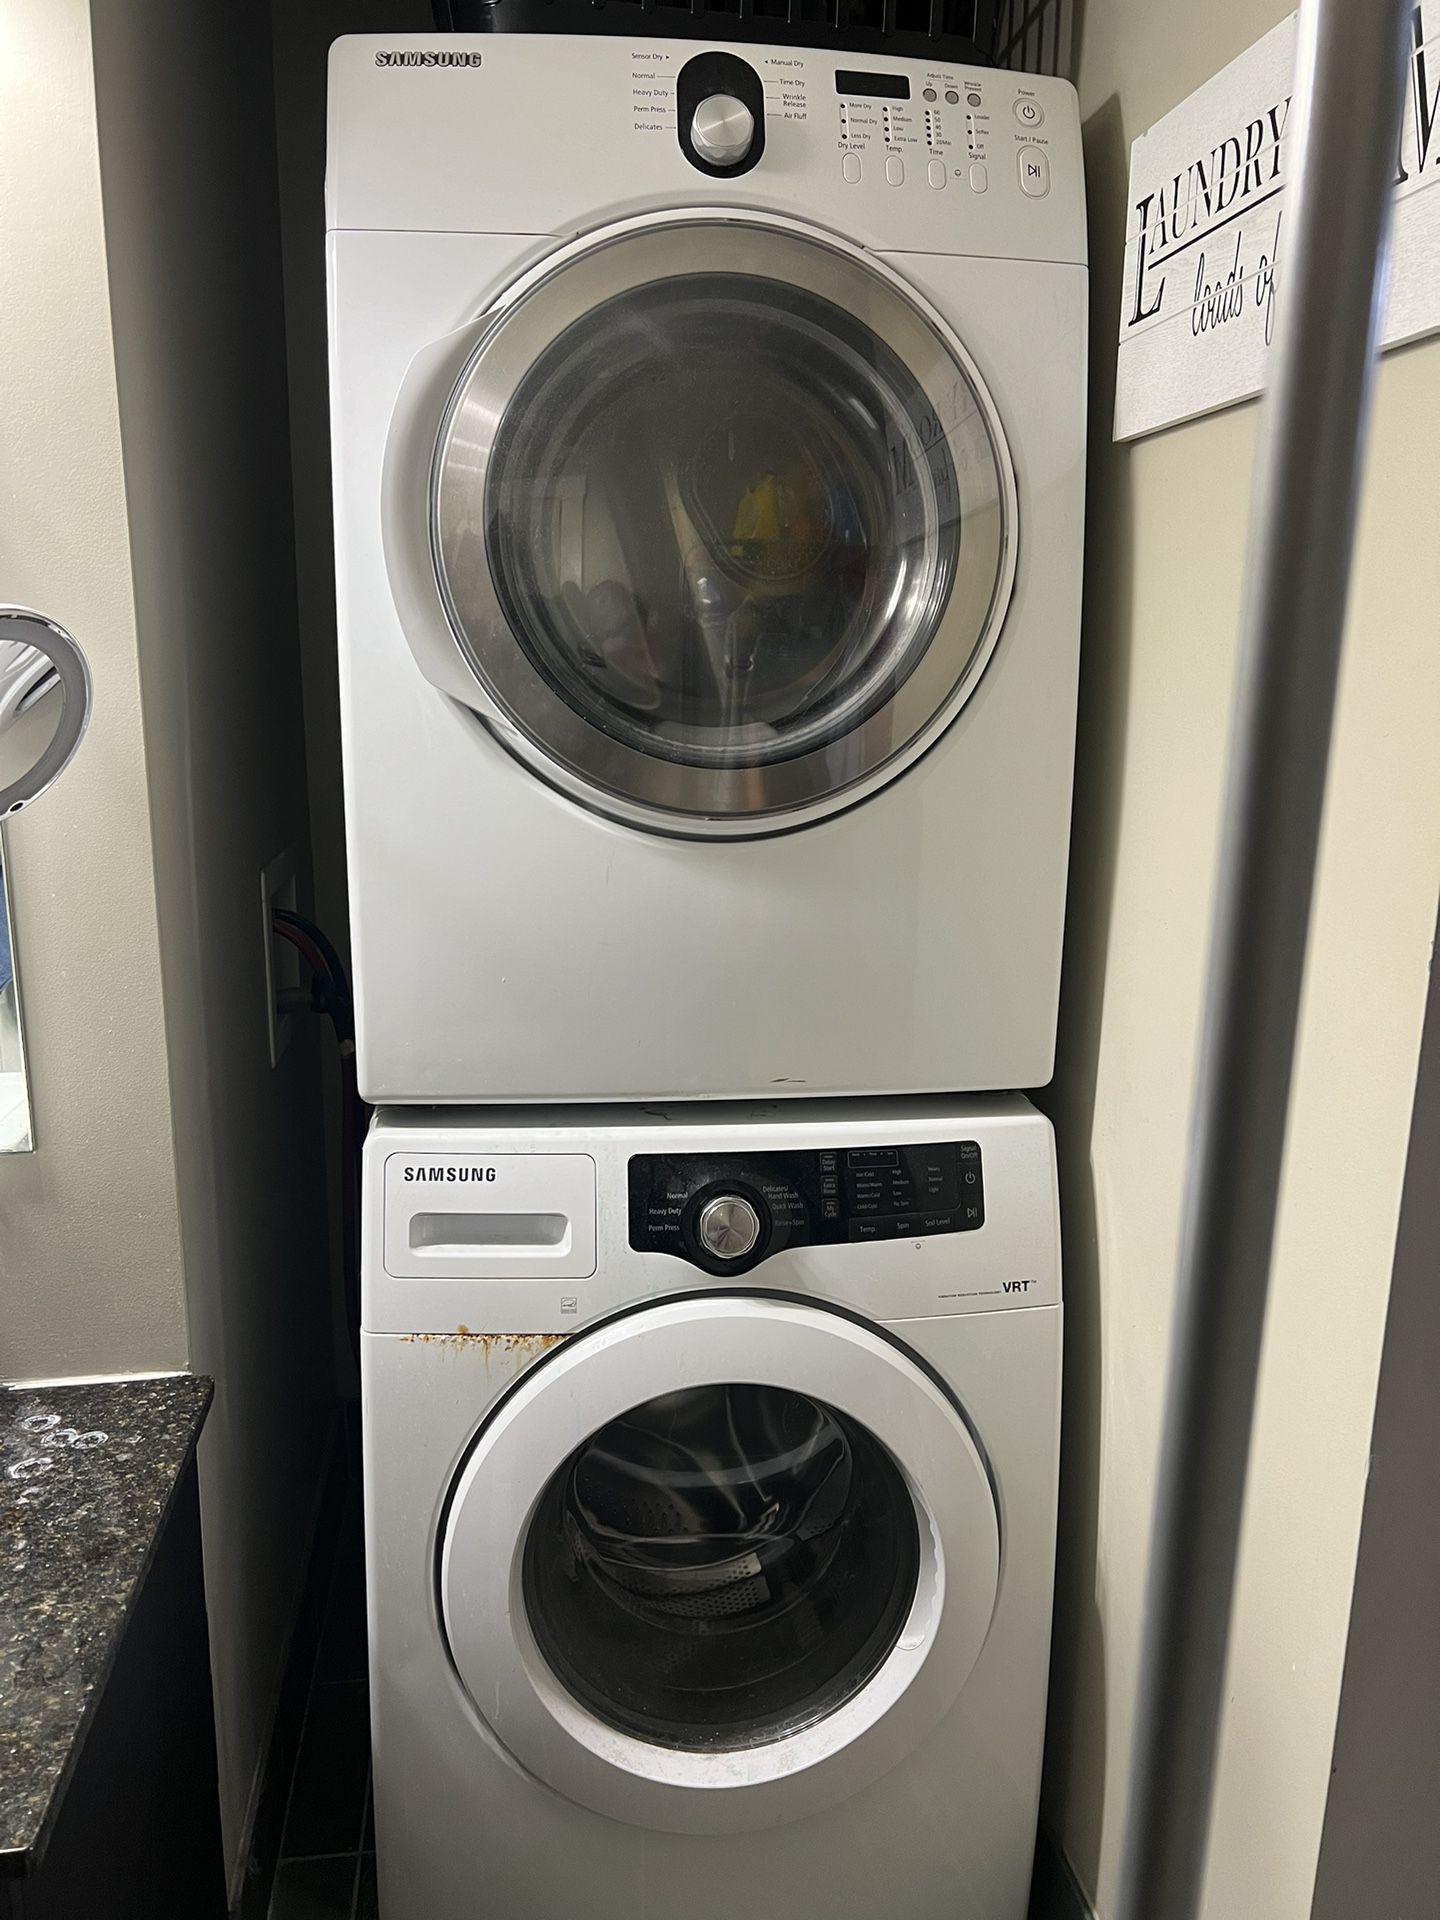 Samsung Washer And Dryer See Description 